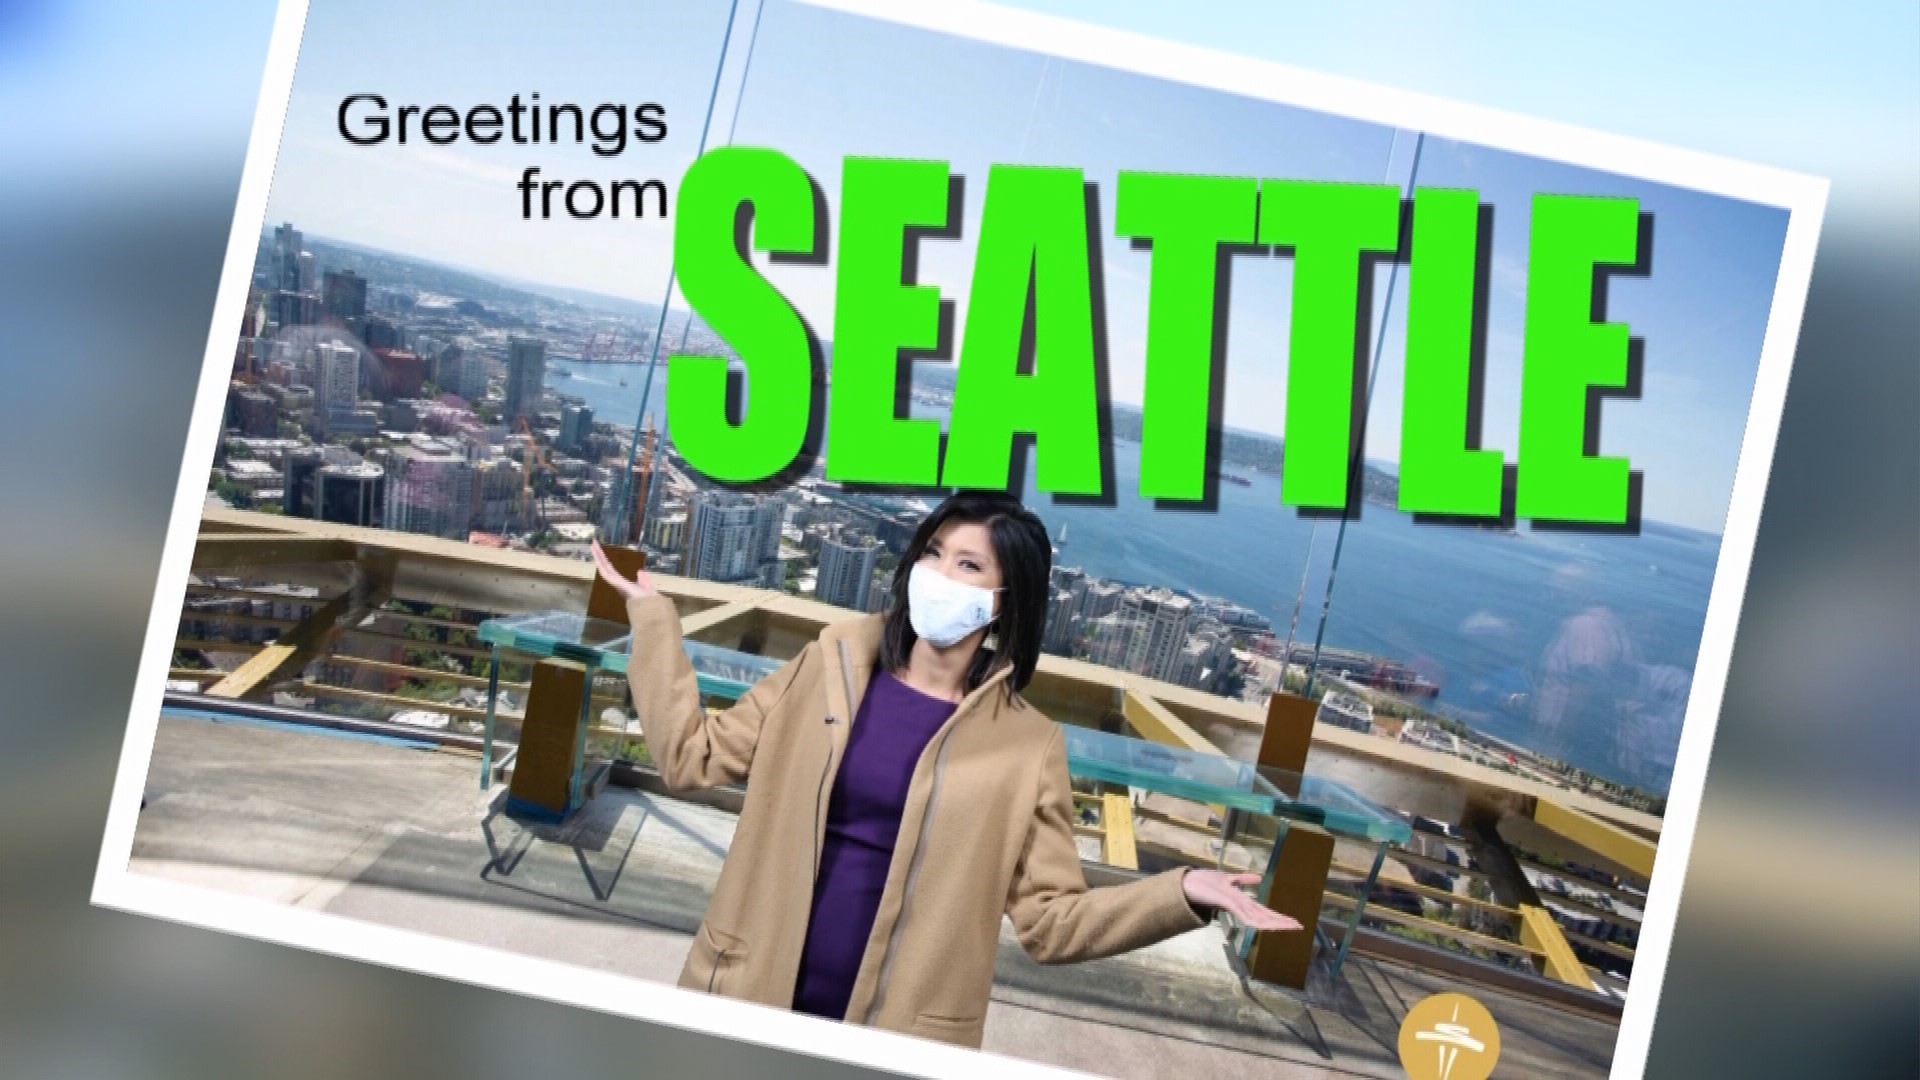 From new sanitizing robots to touchless new displays, the Space Needle has introduced a wealth of new features to keep everyone safe and healthy.